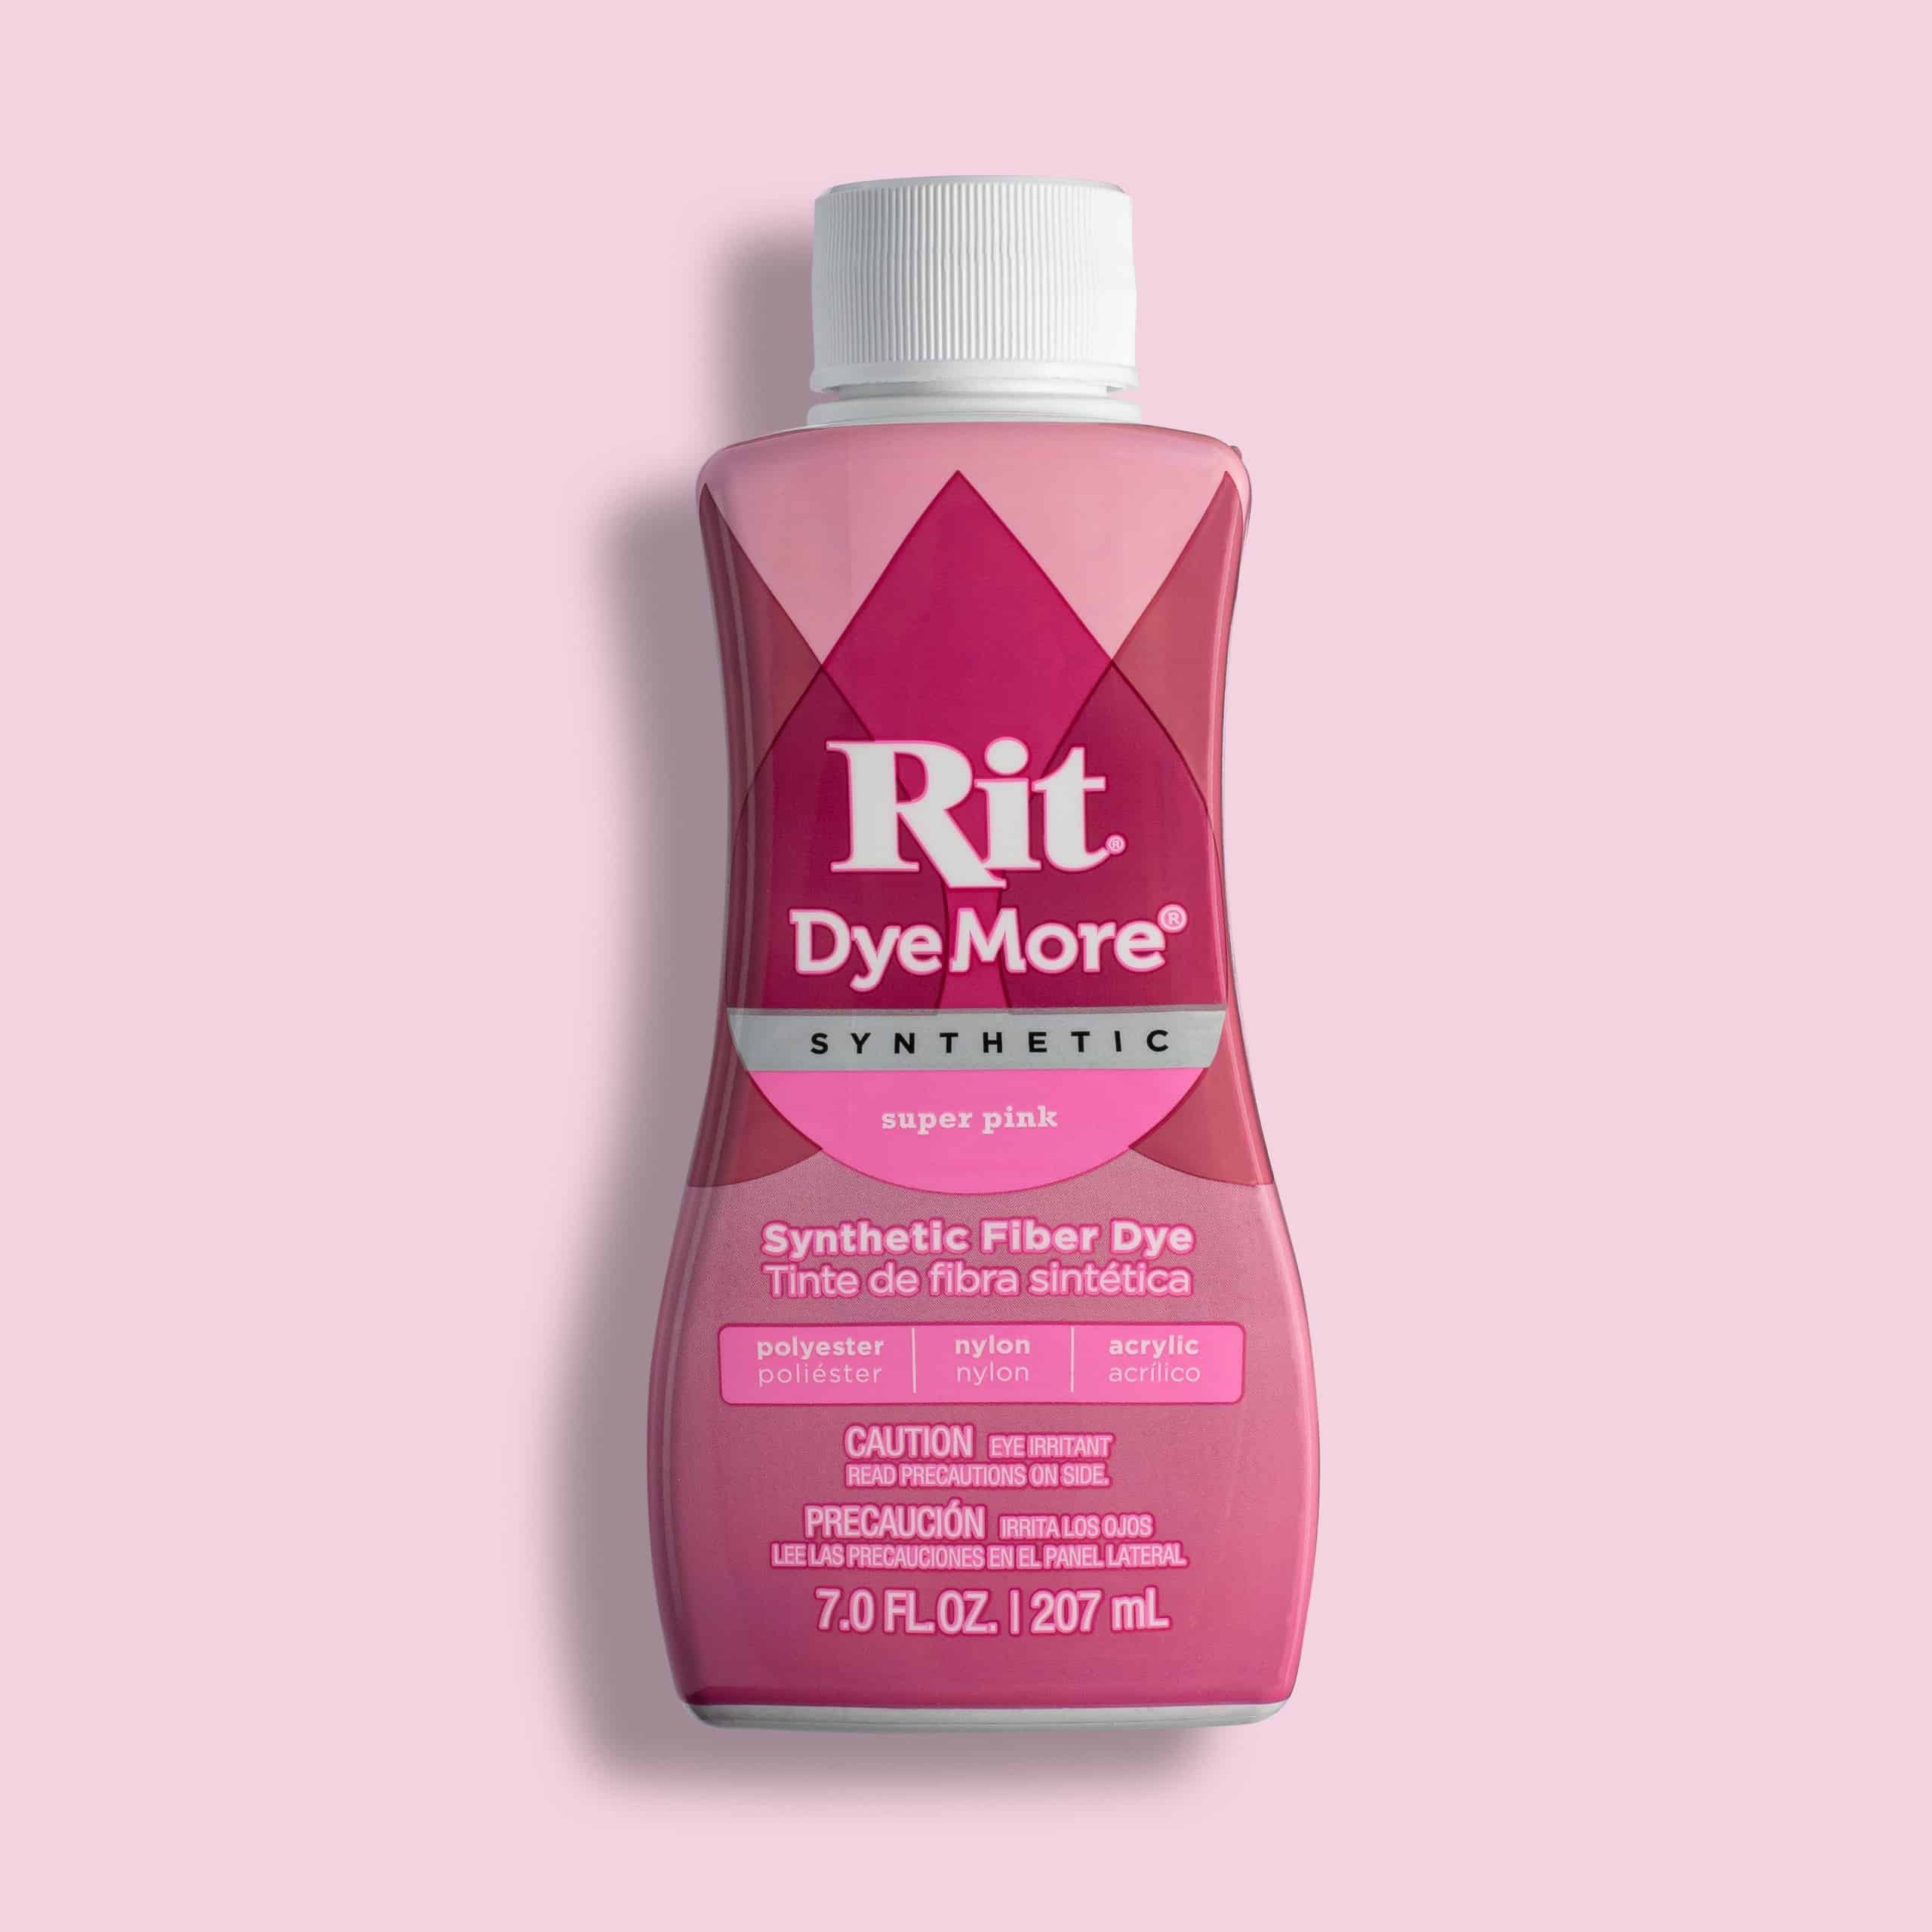 Rit Dye --- go to their website to find out how to make ANY color